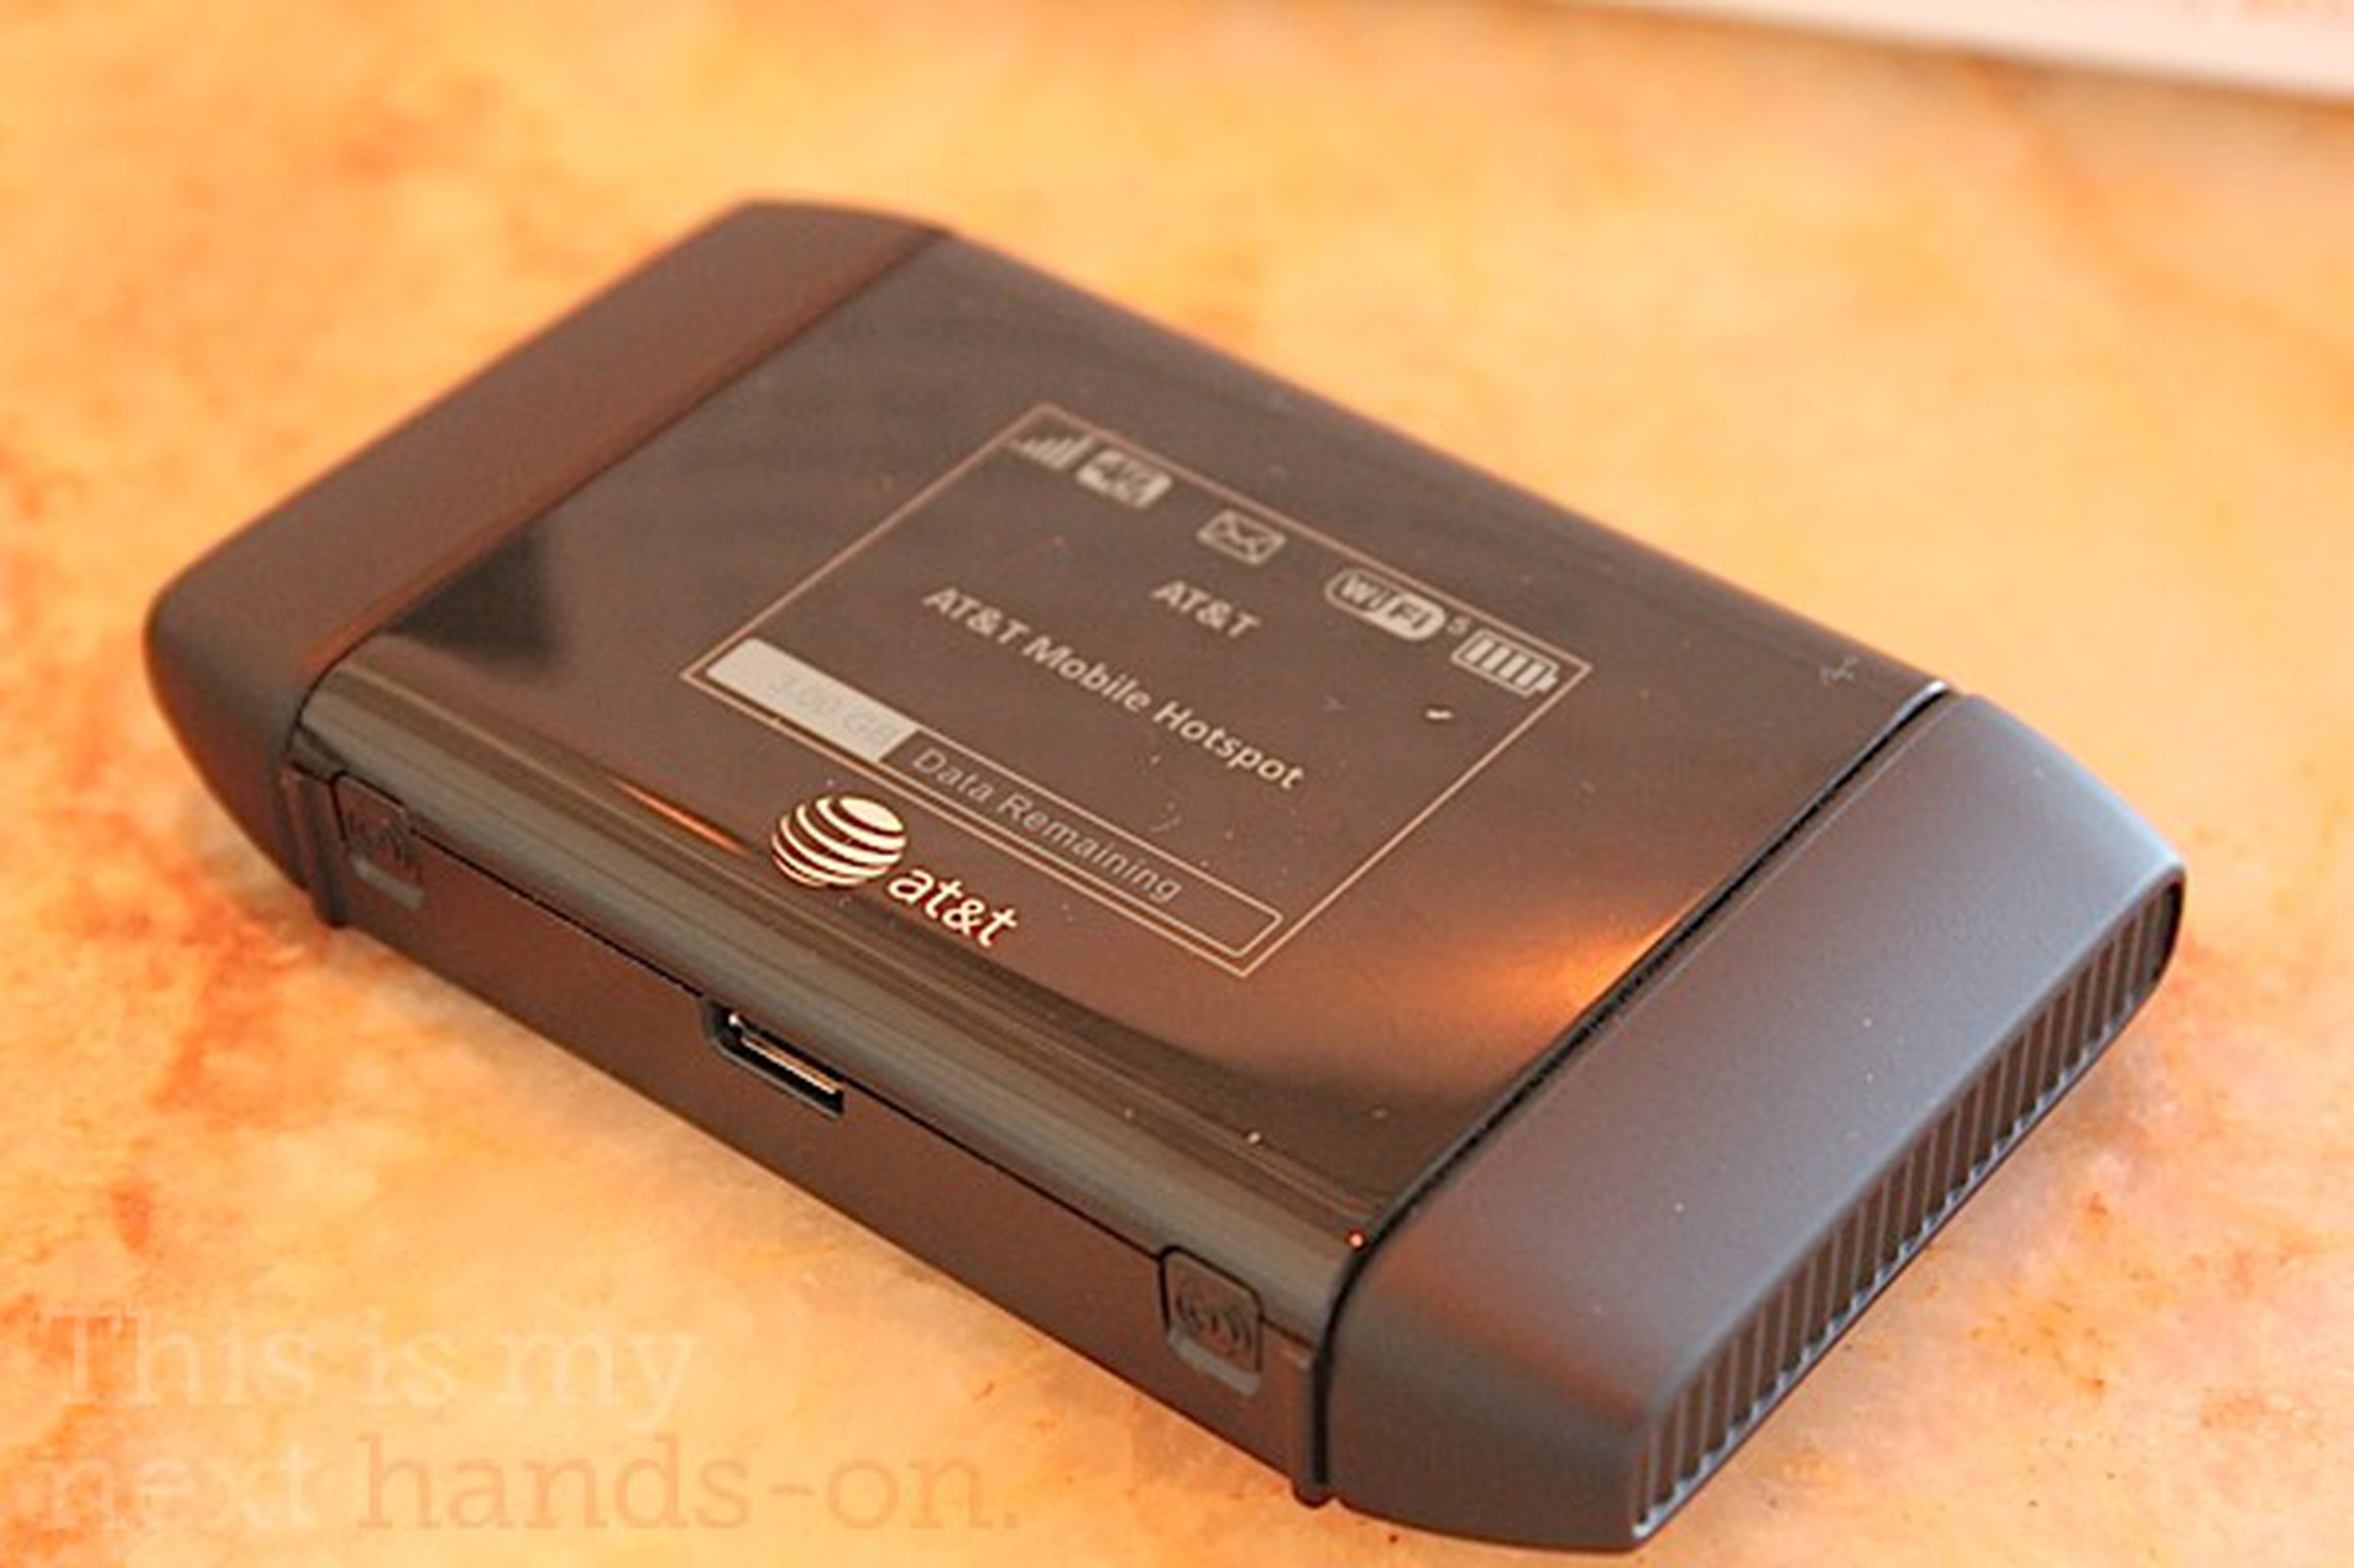 AT&T Mobile Hotspot Elevate 4G and USBConnect Momentum 4G hands-on pictures